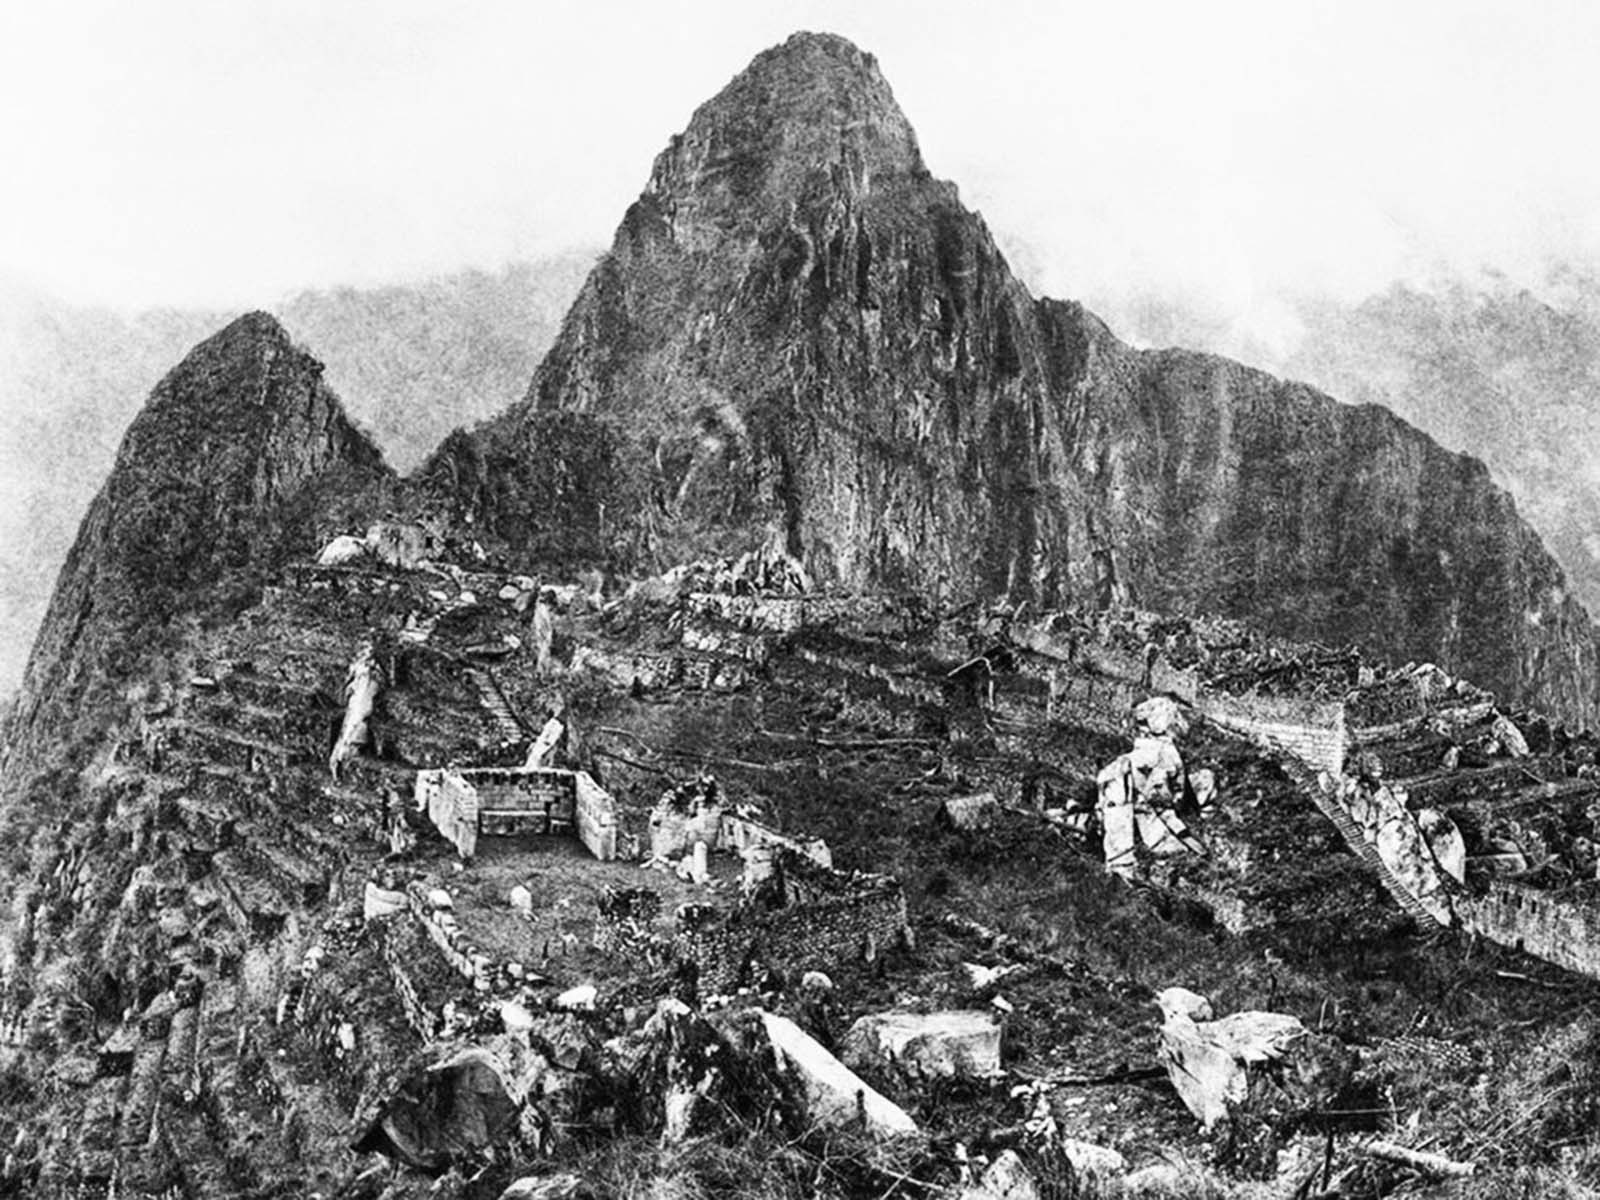 the_first_photograph_upon_discovery_of_machu_picchu_1912.jpg